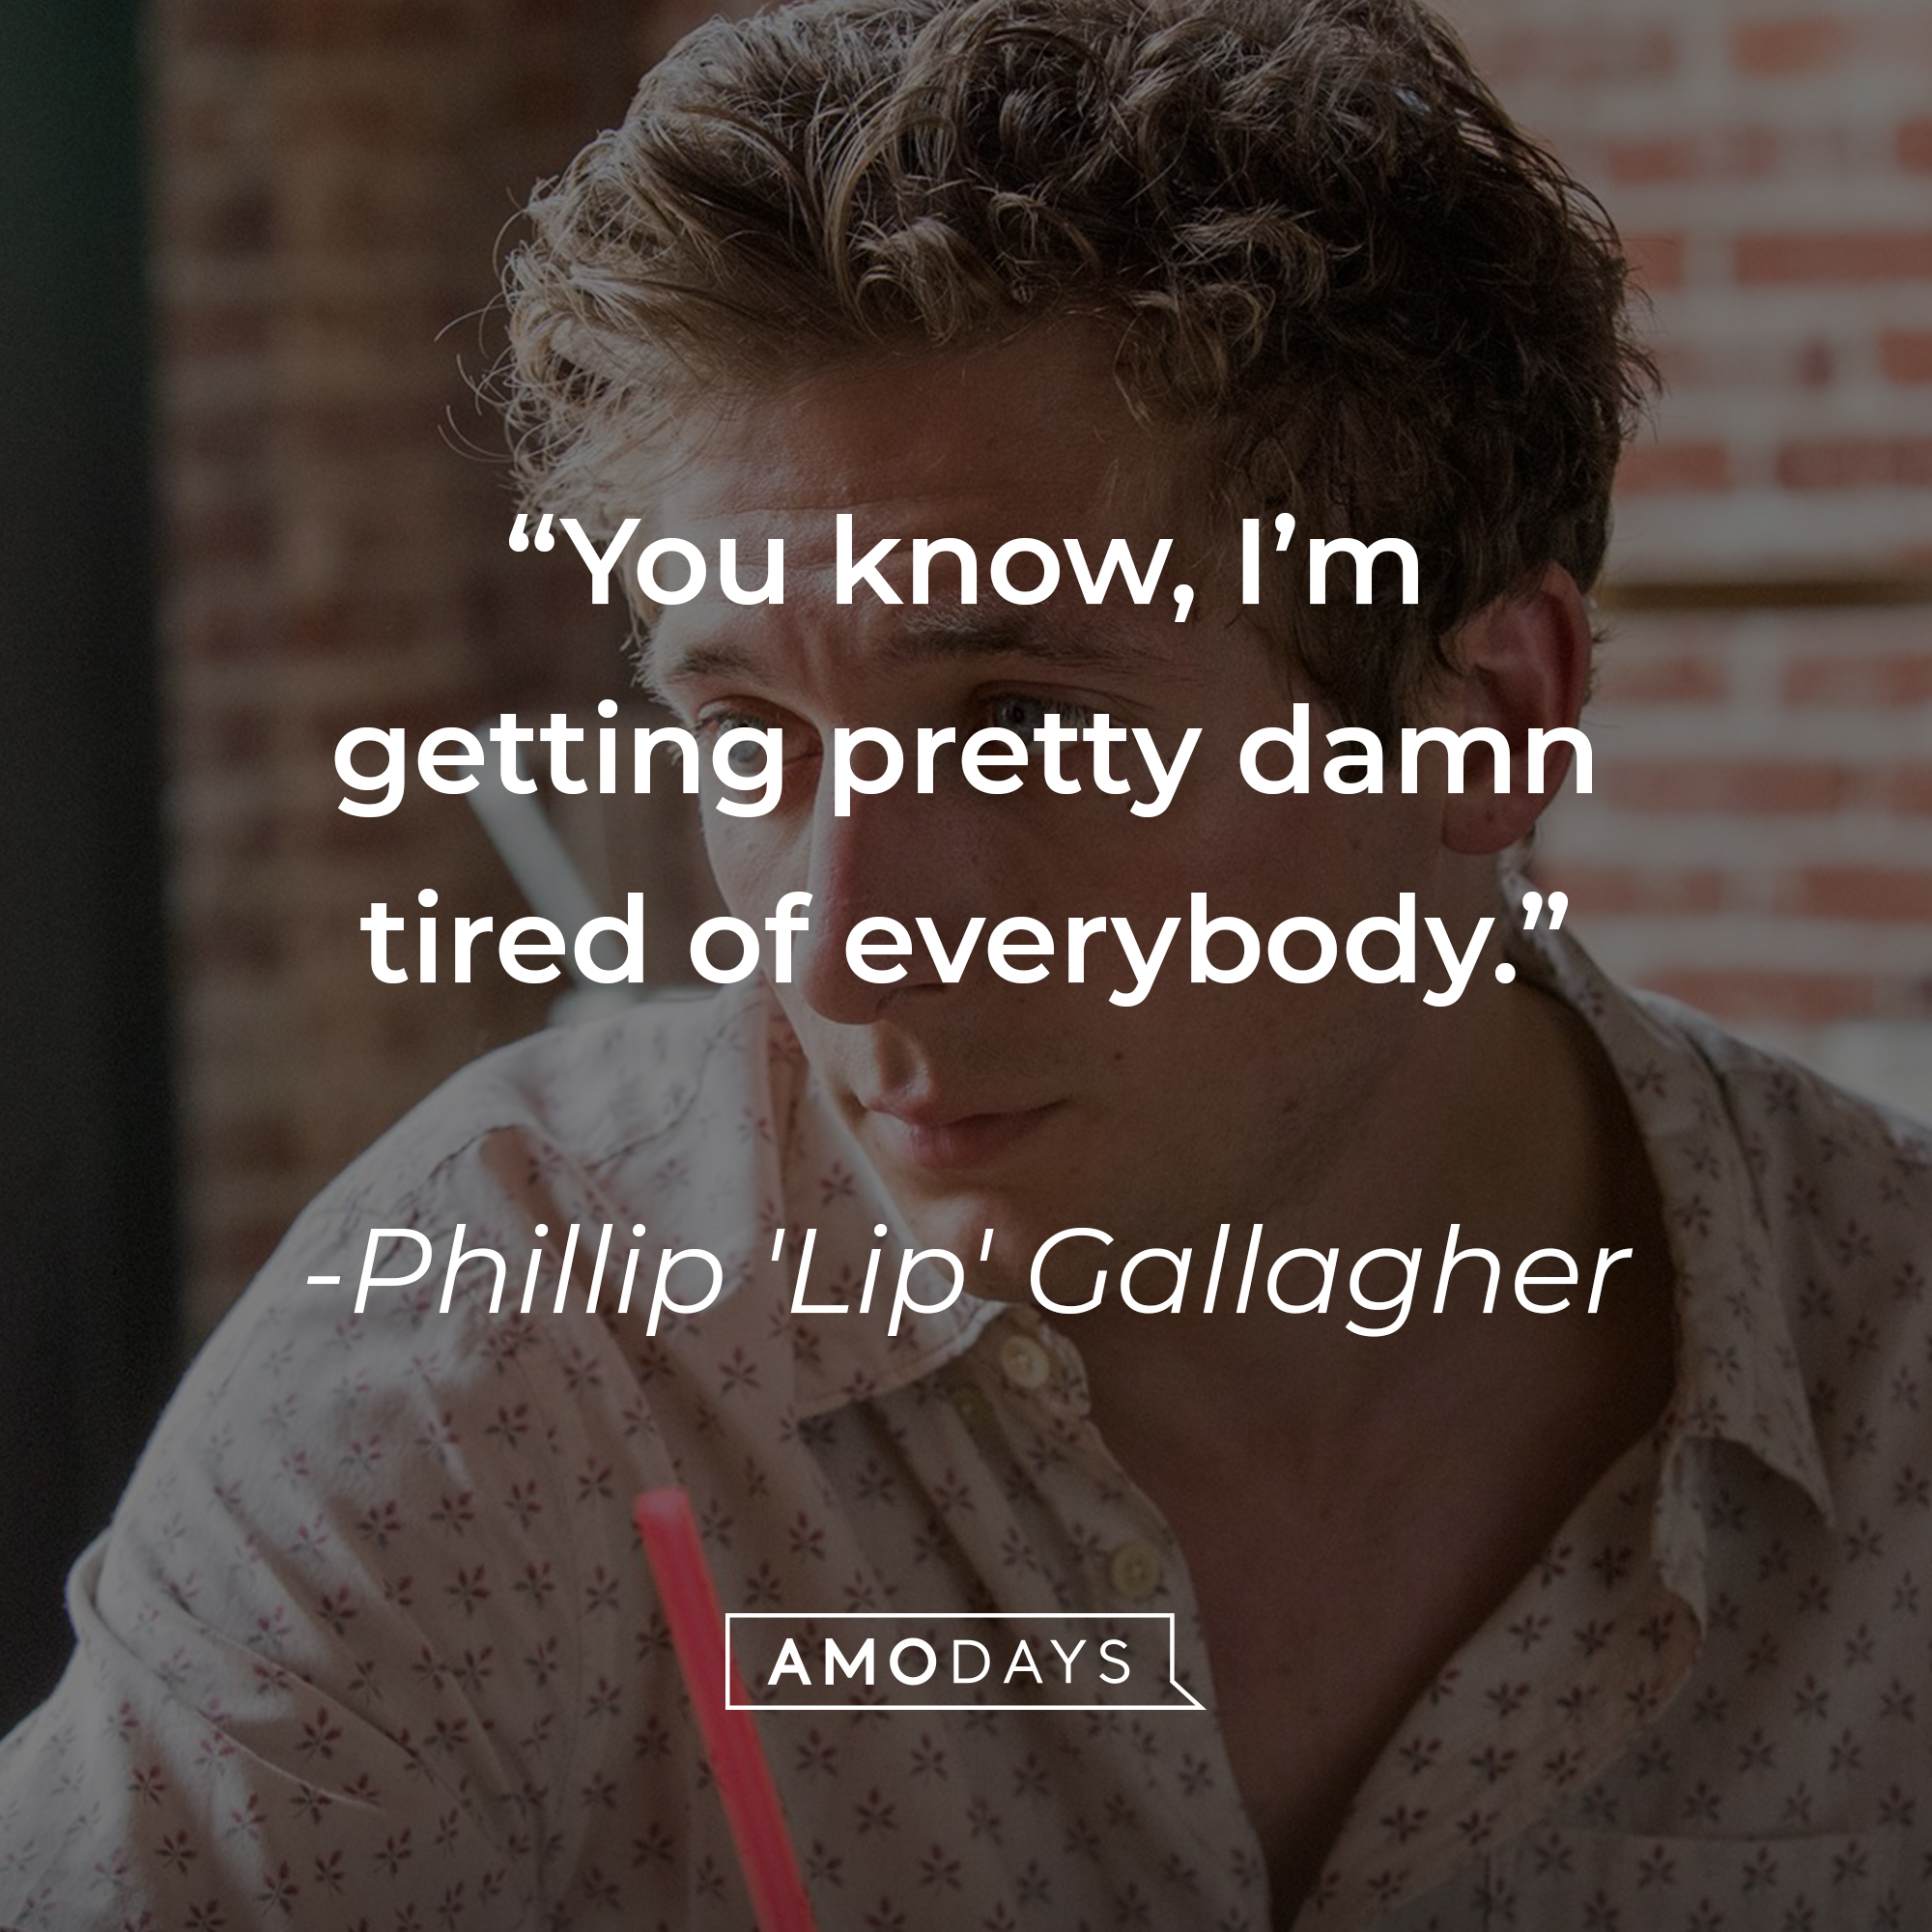 Phillip 'Lip' Gallagher with his quote: “You know, I’m getting pretty damn tired of everybody.”  | Source: facebook.com/ShamelessOnShowtime